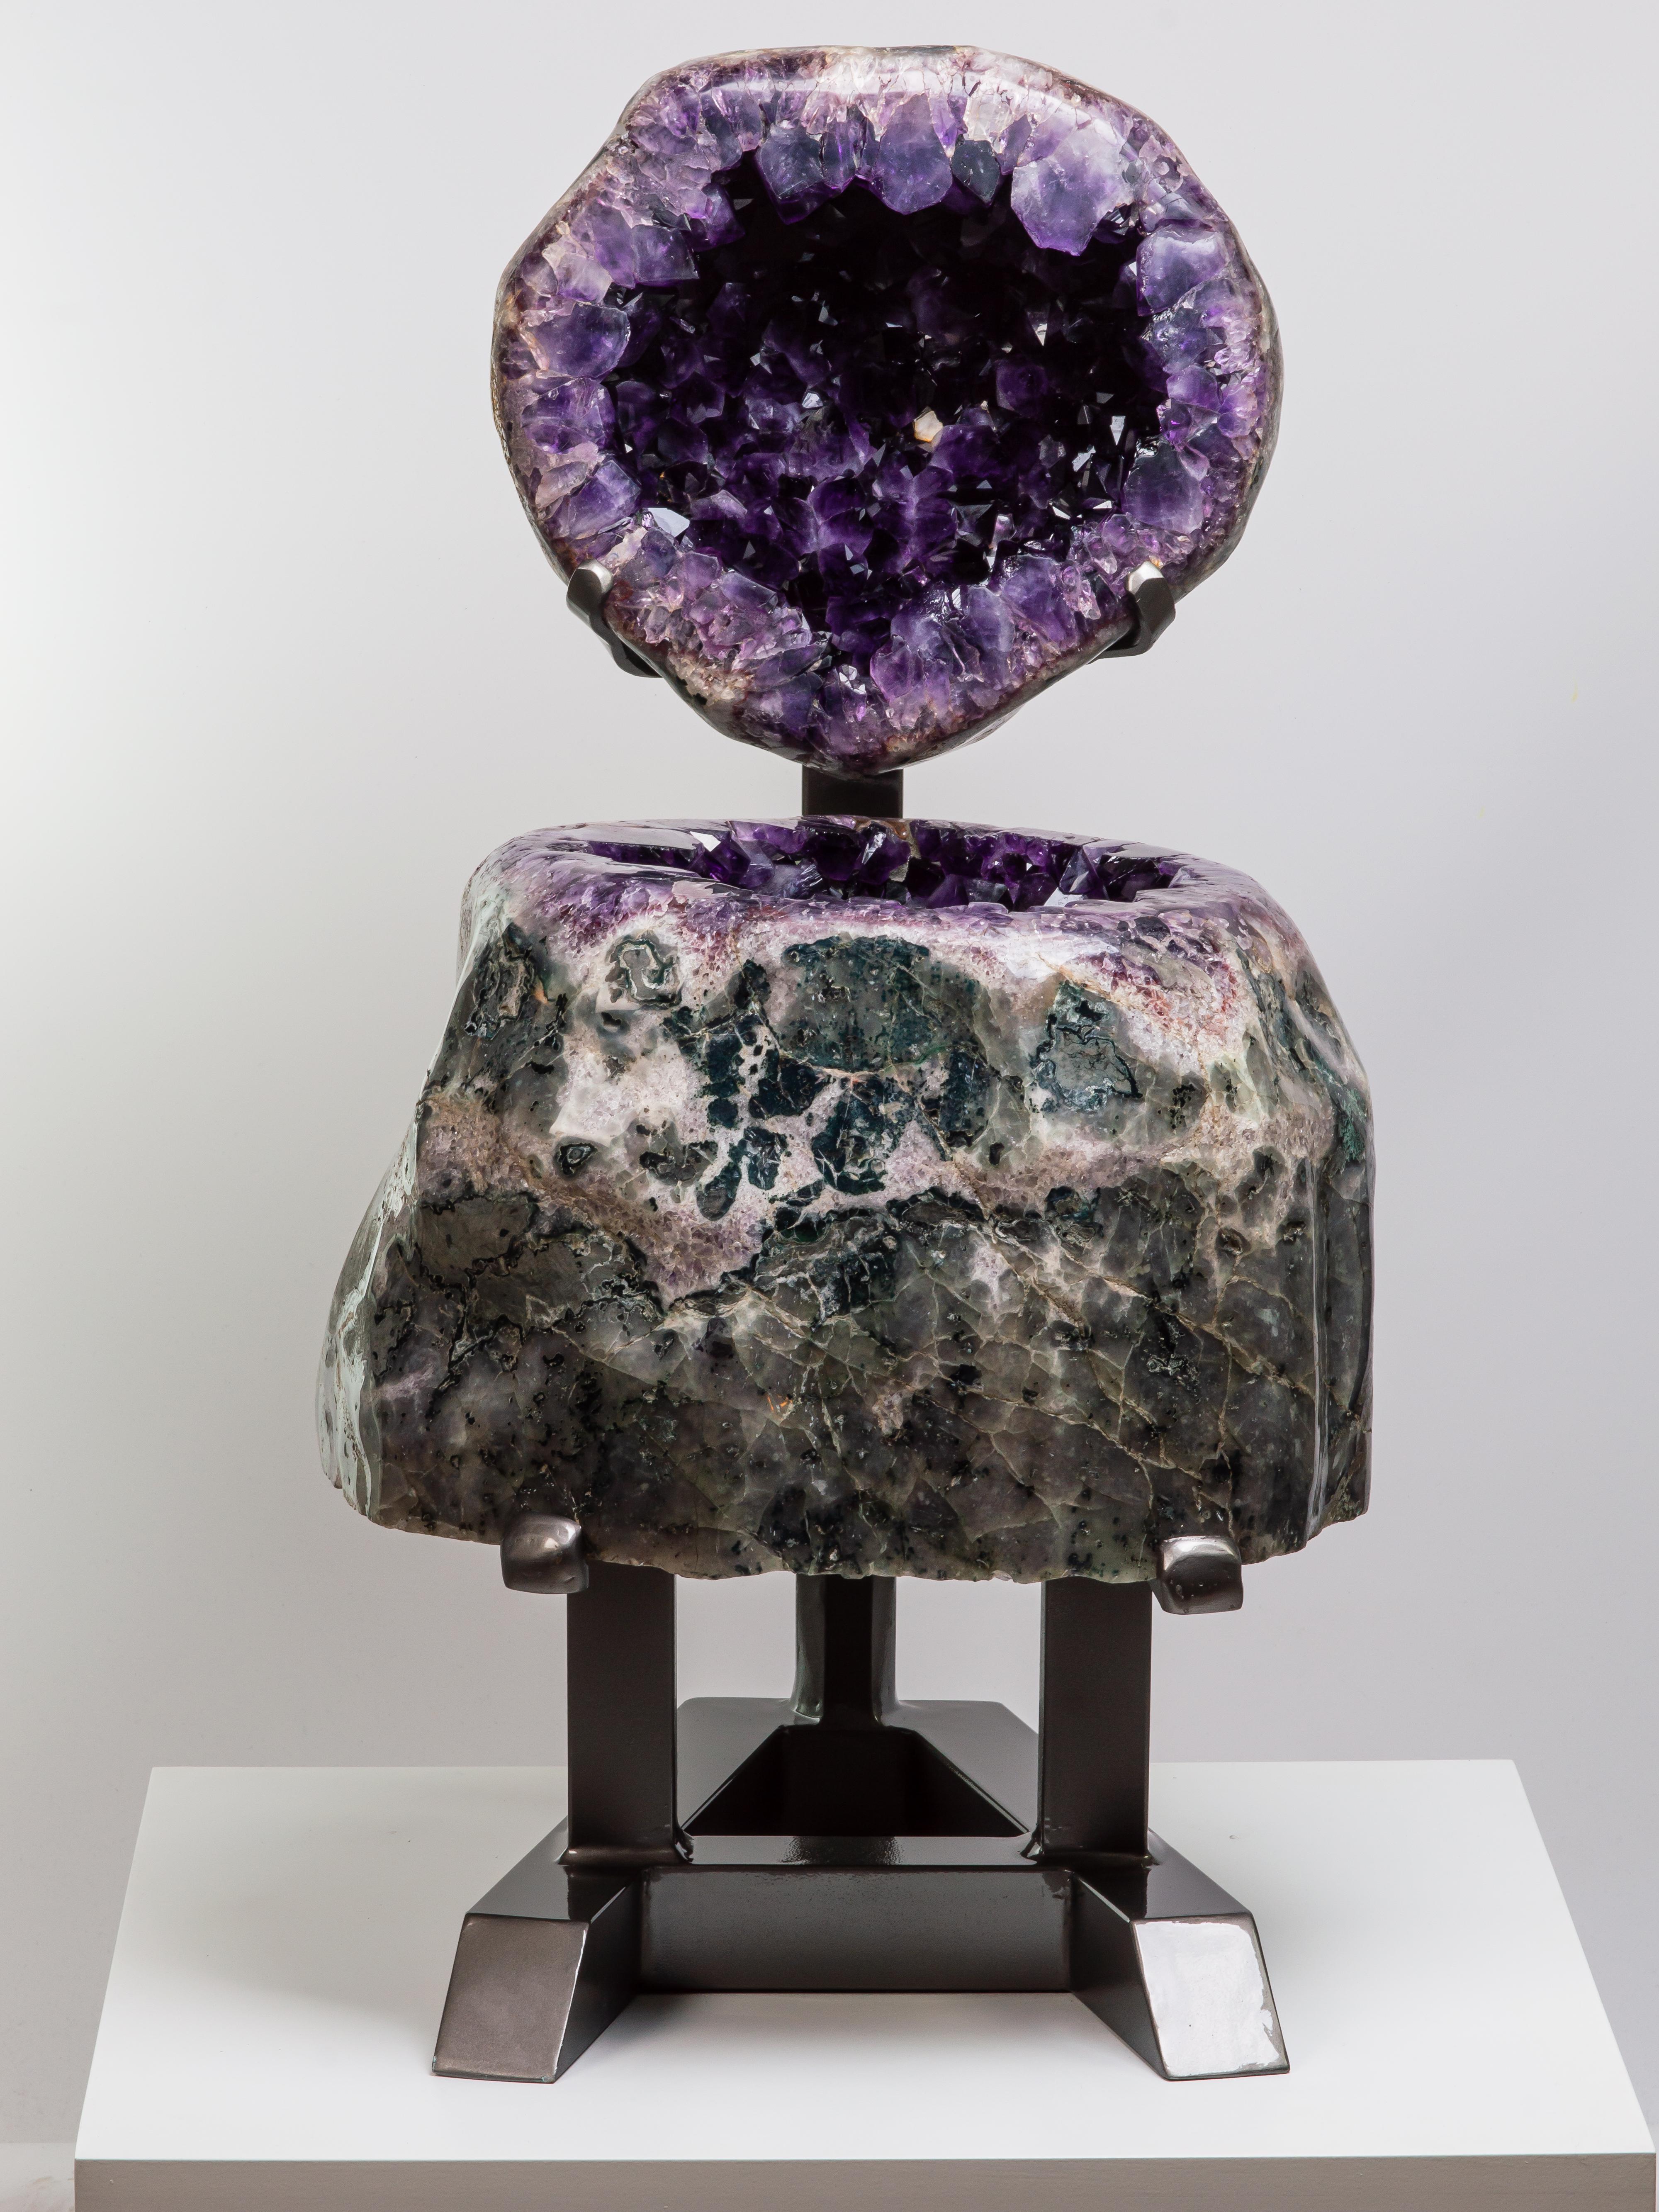 In this alternative display, the stunning large geode with its agatised borders is
shown with the top presented vertically. The deep purple, high peaked crystals
are visible on the top and bottom sections, with a small calcite adorning the